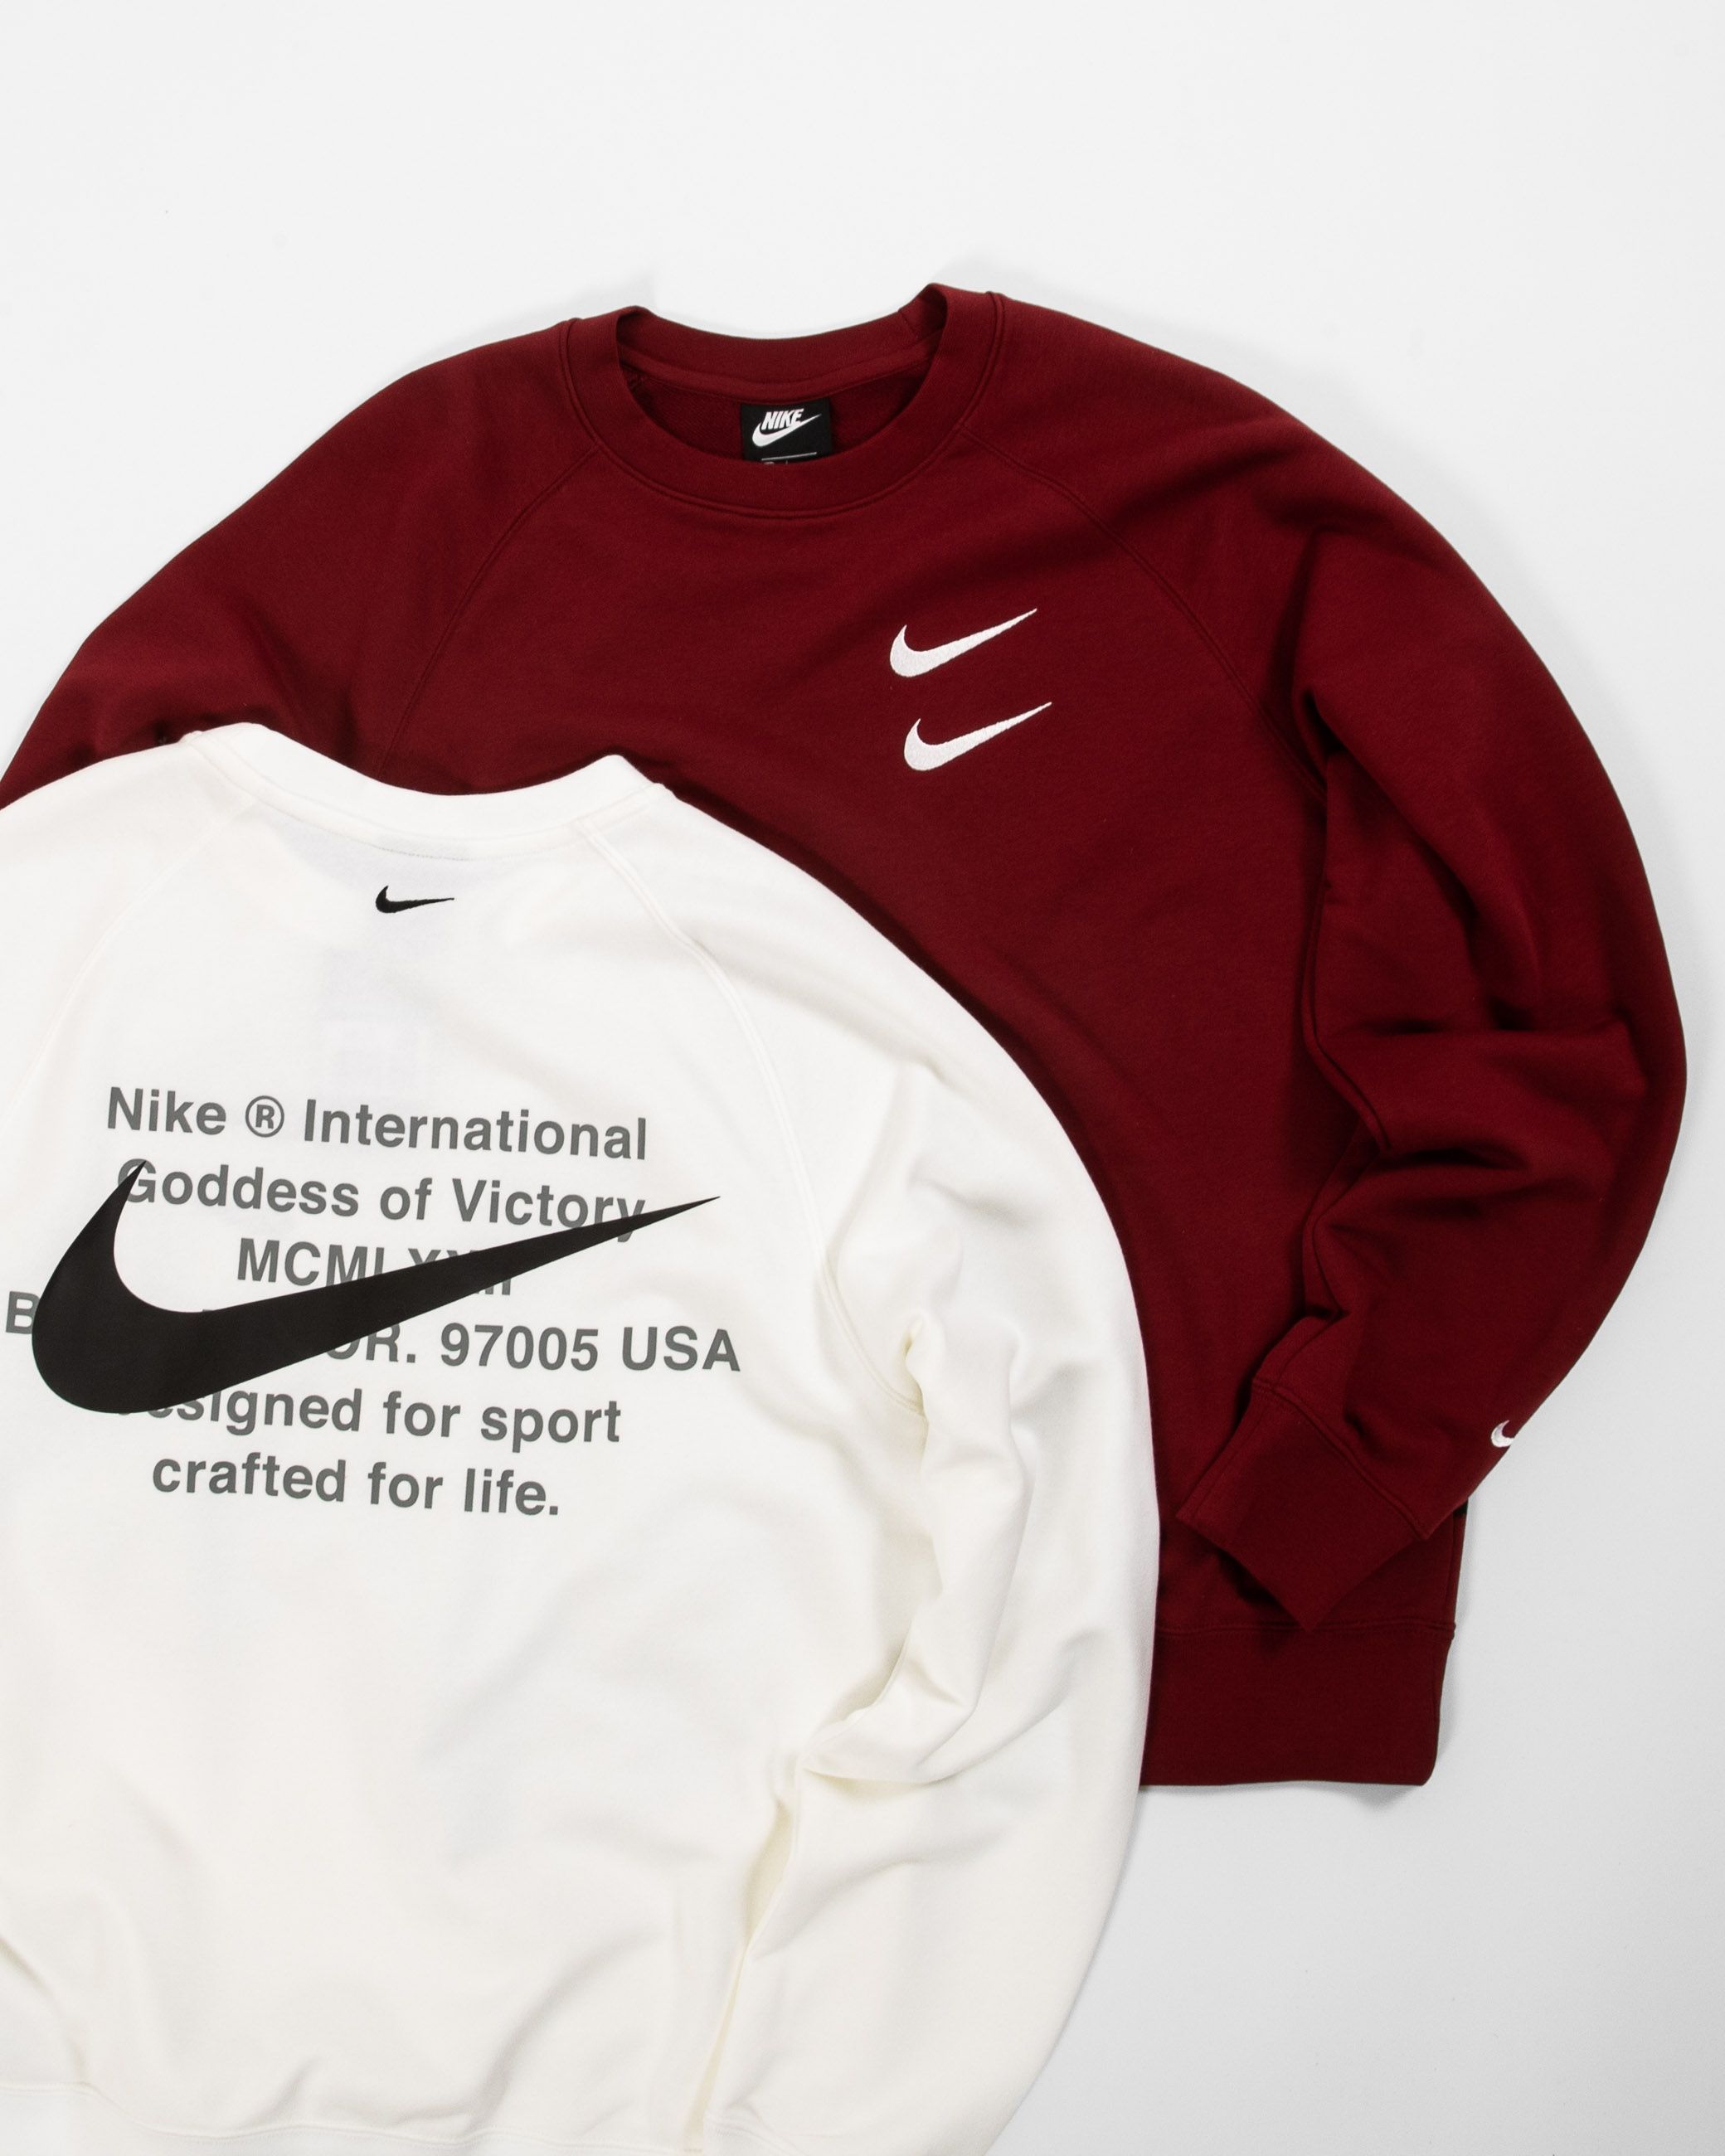 Titolo on Twitter: "Just In 🔴 The admired Double Swoosh Collection gets a  new style with this Nike Sportswear French Terry Swoosh Crew Sweat.⁠  https://t.co/ndfa3N3hgS small to x-large⁠⠀ 🔎CJ4871-101 and CW7399-677⠀ # titolo #